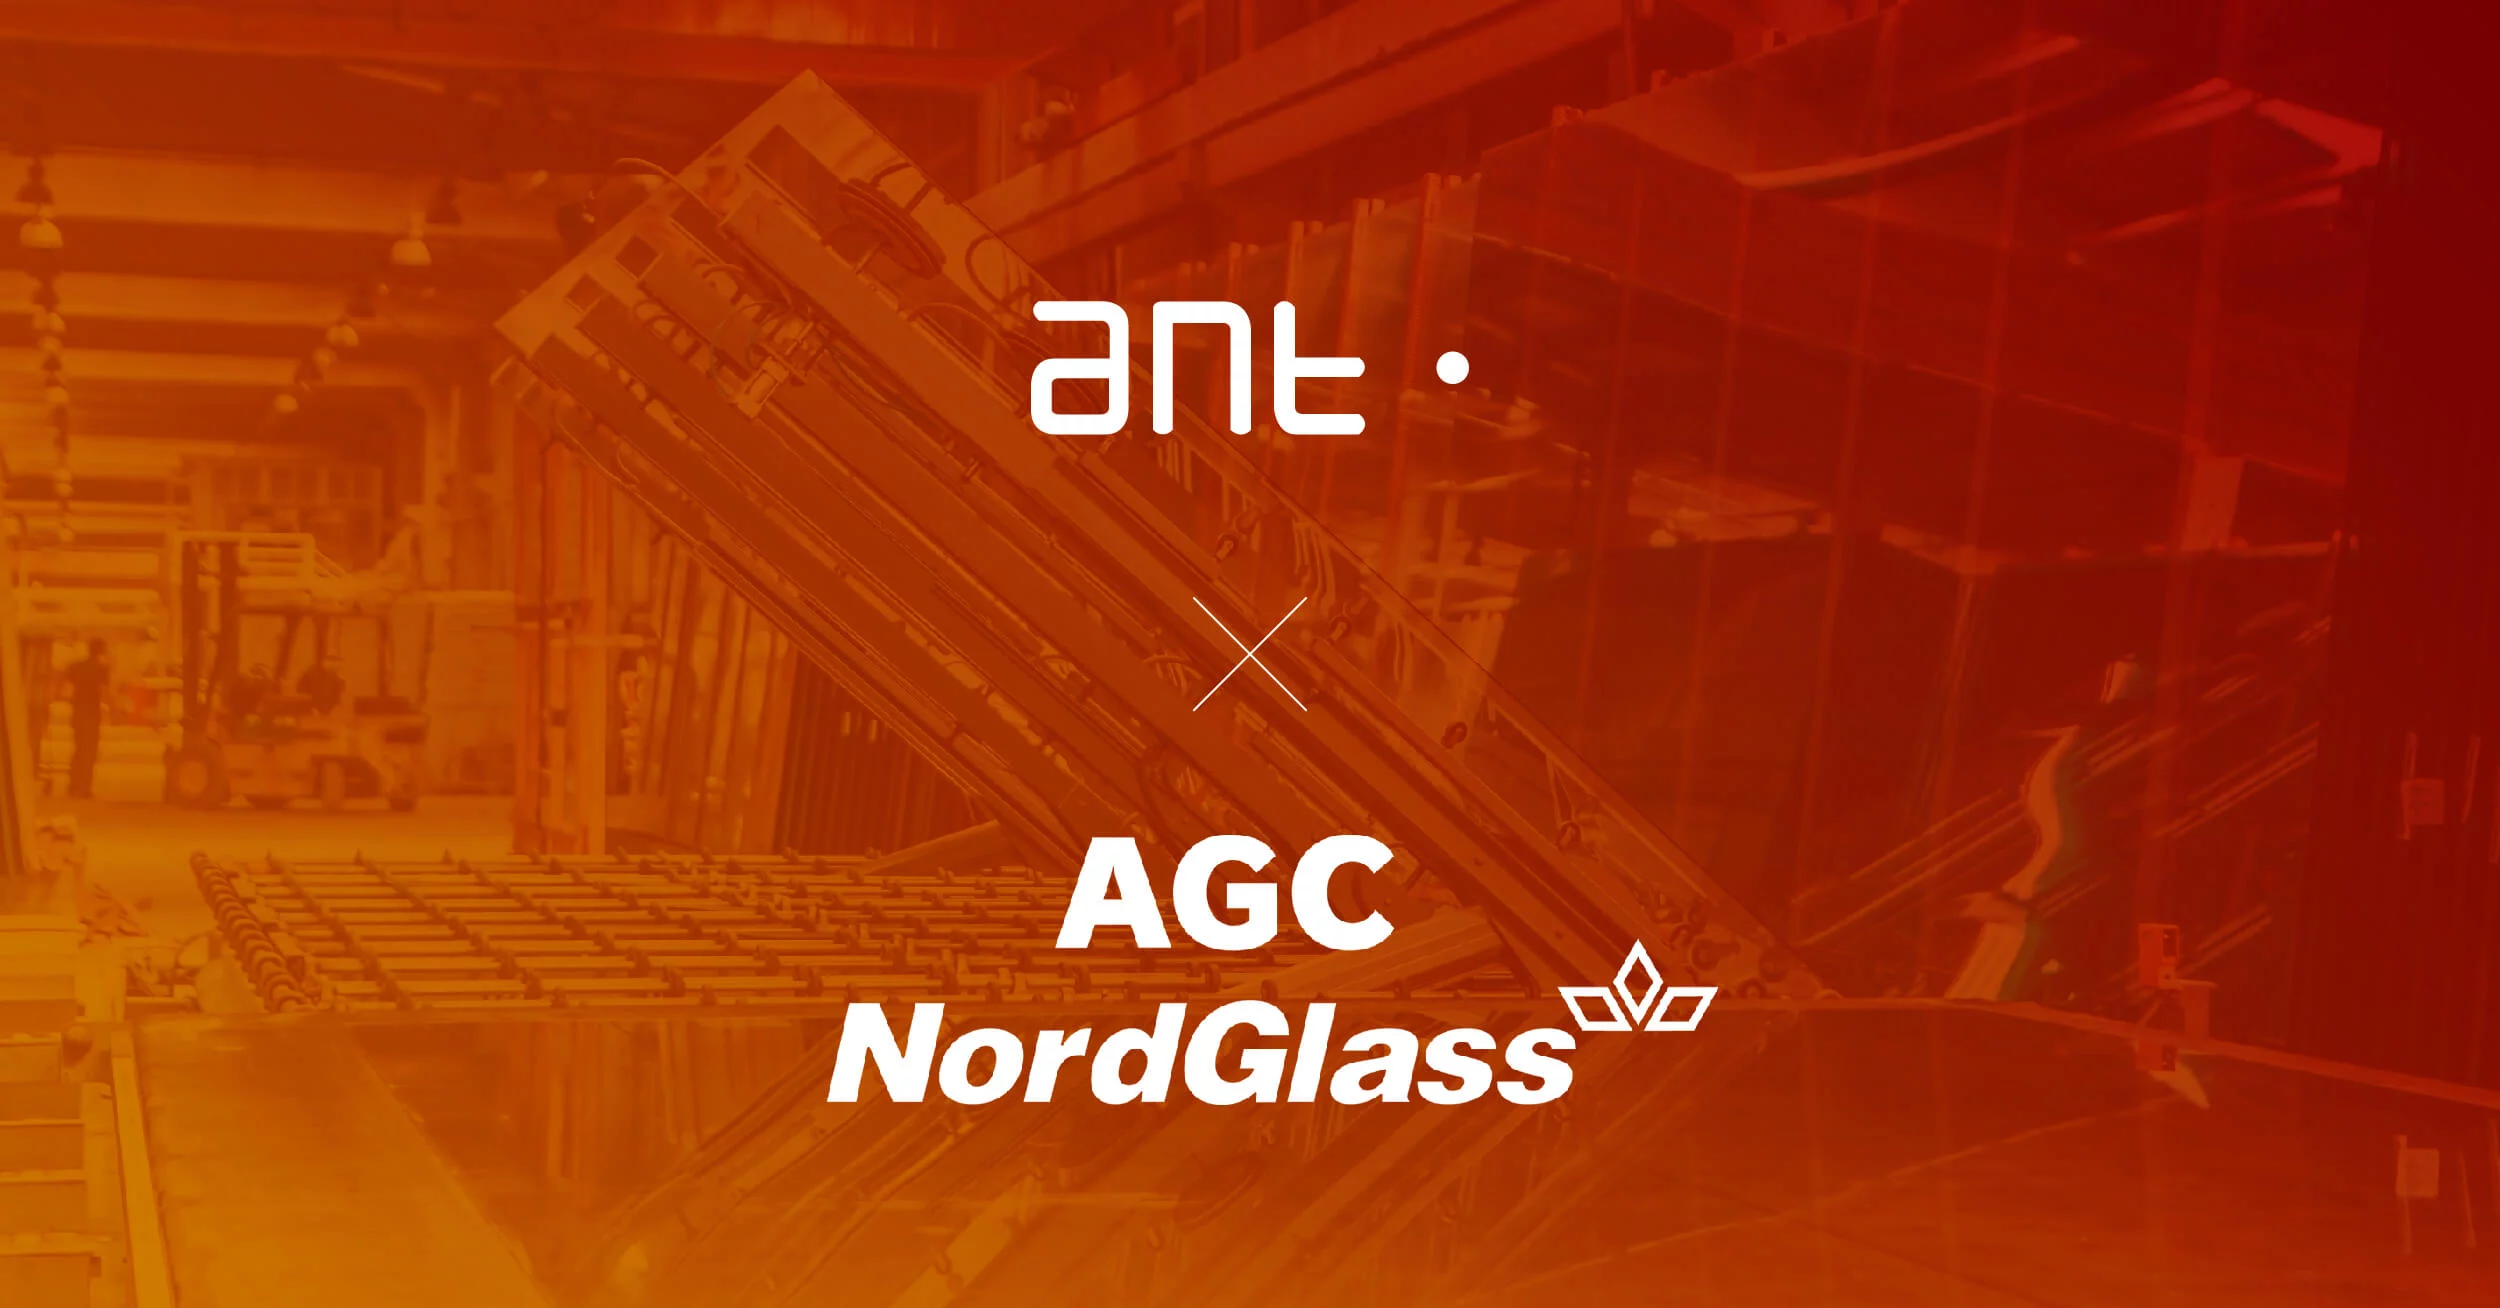 NordGlass and ANT Solutions is starting coolaboration